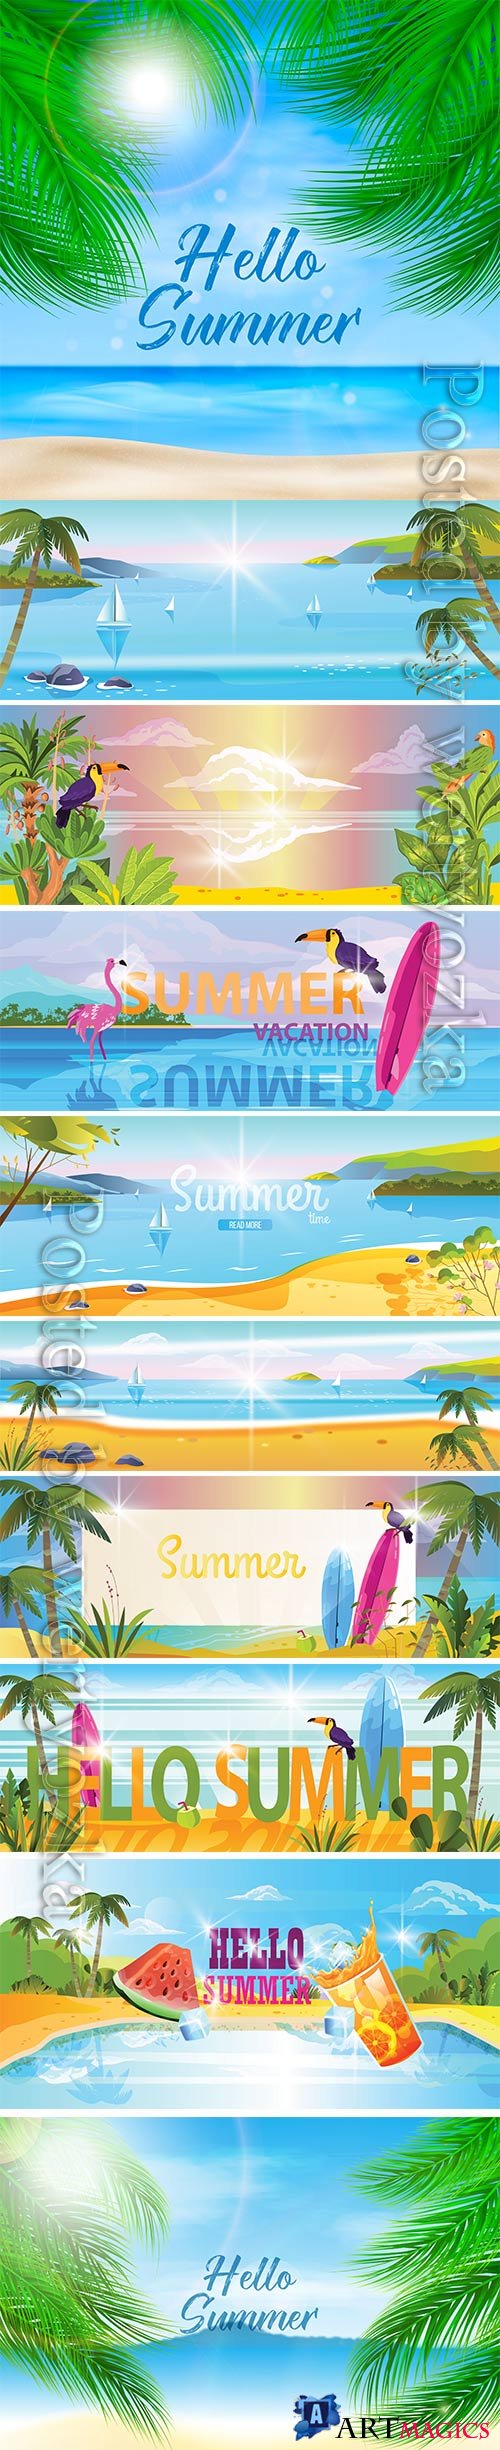 Summer vacation banner with topical landscape view